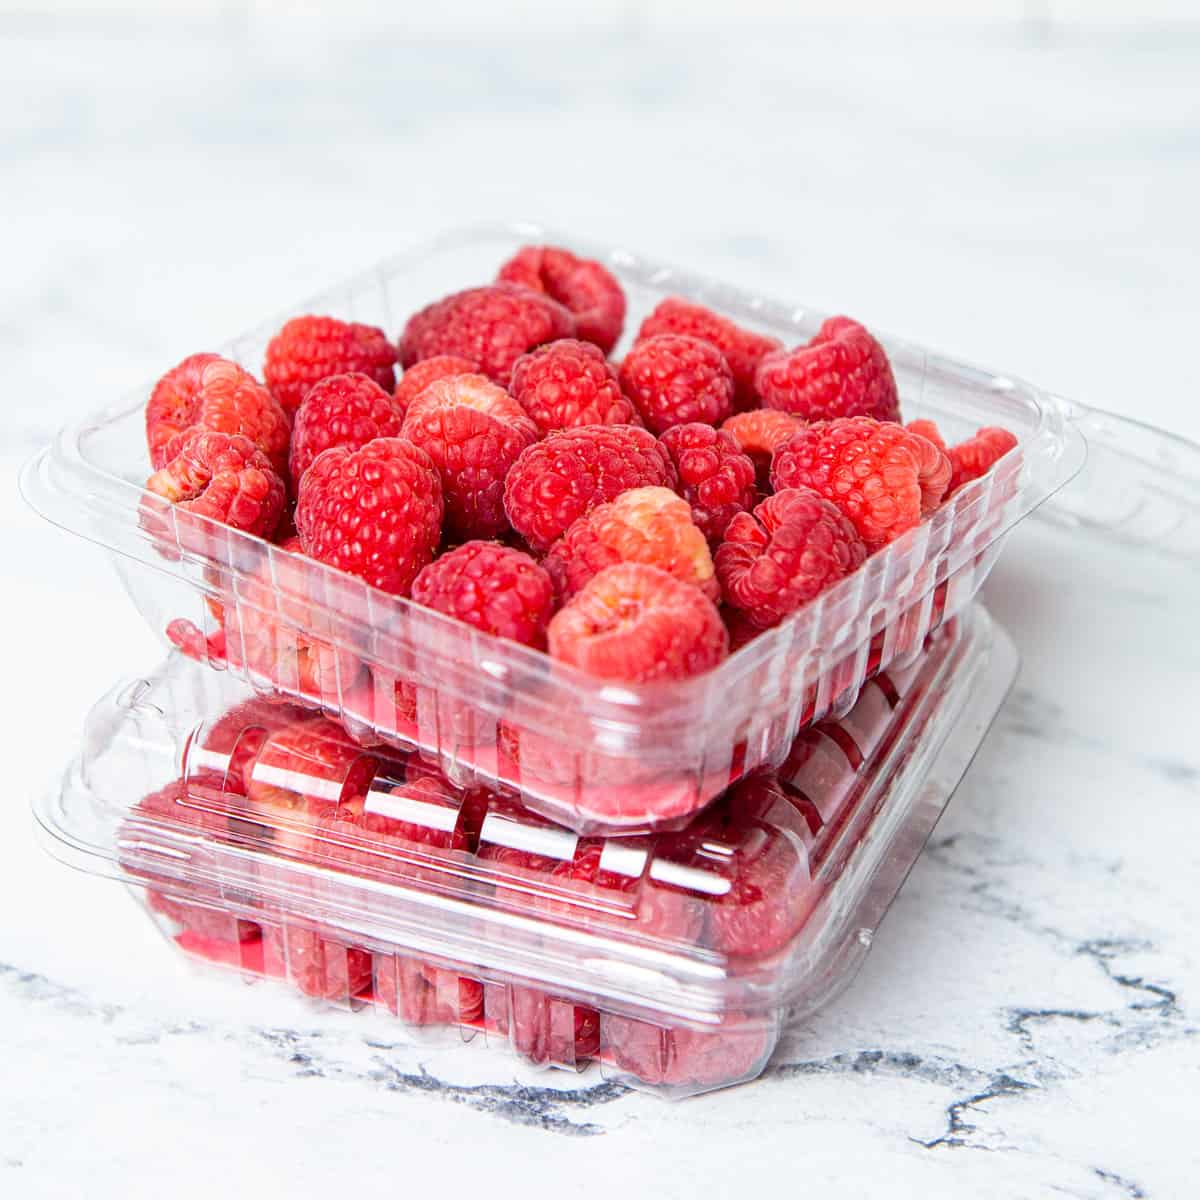 Raspberries in containers on a counter.